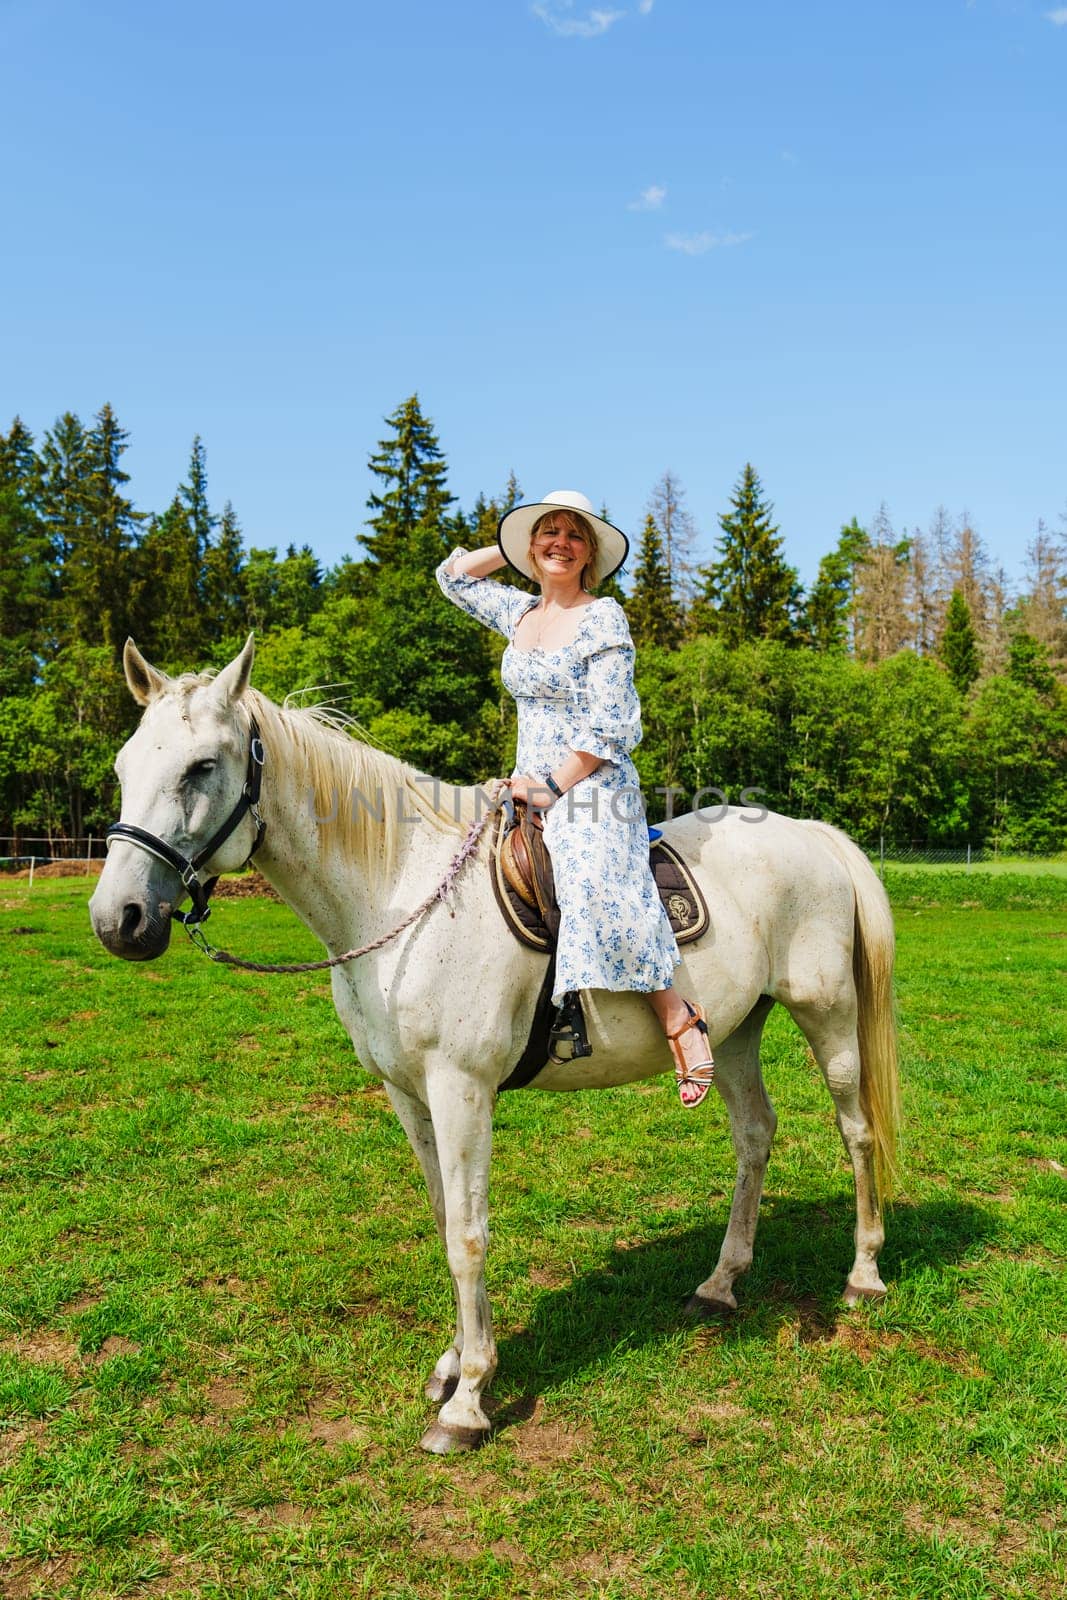 A serene and tranquil scene of a young woman riding a magnificent white horse in the golden glow of a sunlit summer day, with lush greenery in the background.